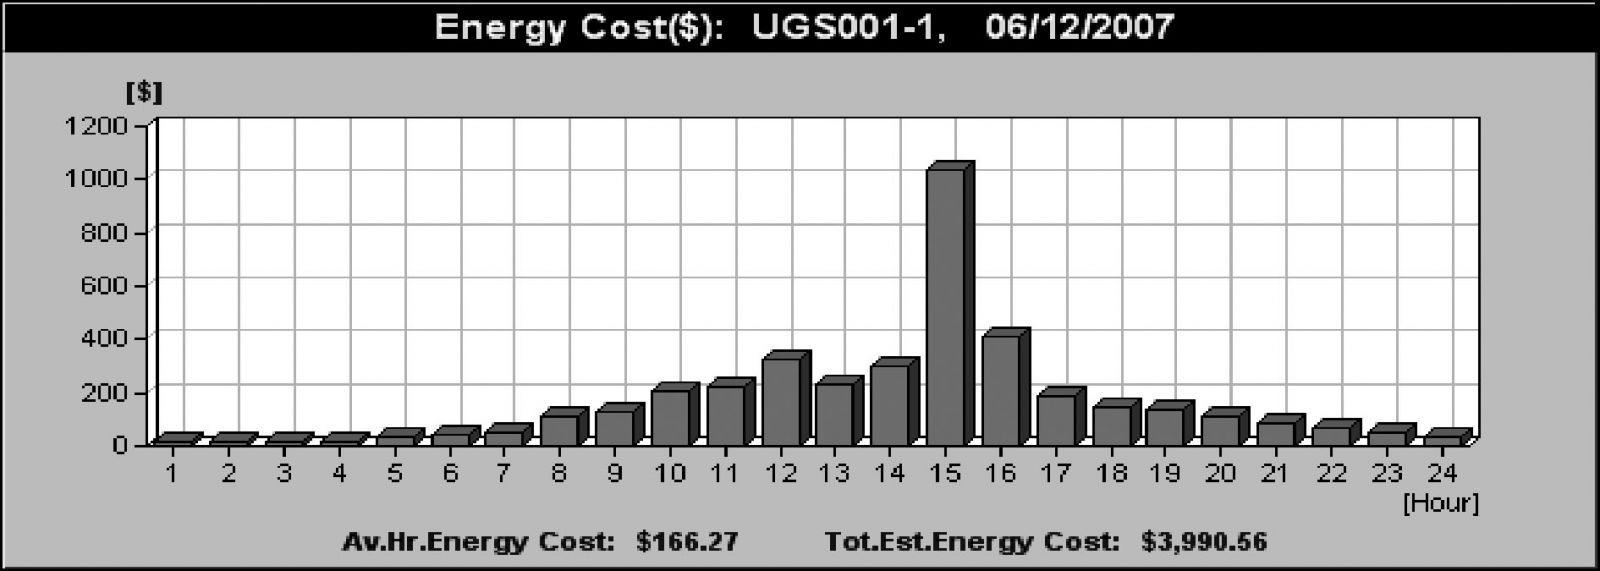 sample chart showing Resulting Electric Energy Cost for 24 hours